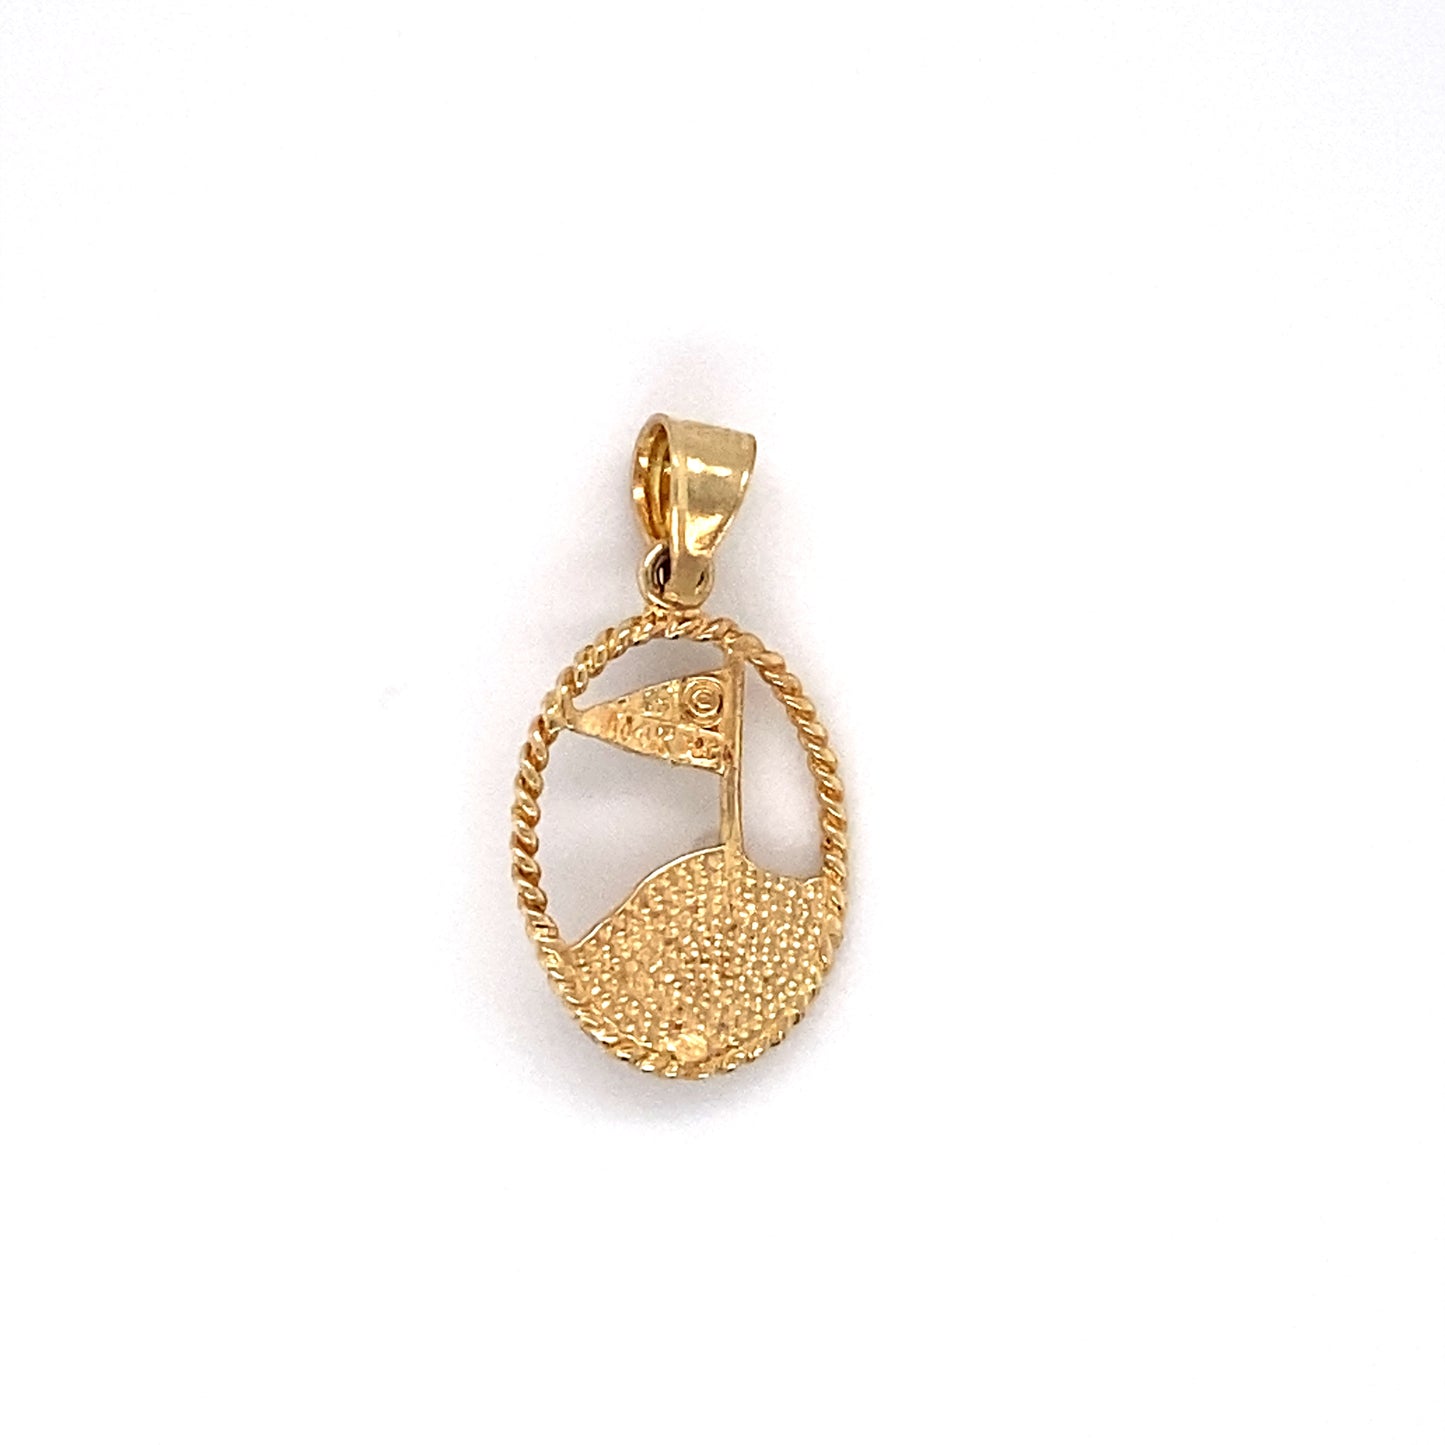 Vintage 18th Hole Golf Pendant with Pearl in 14K Gold